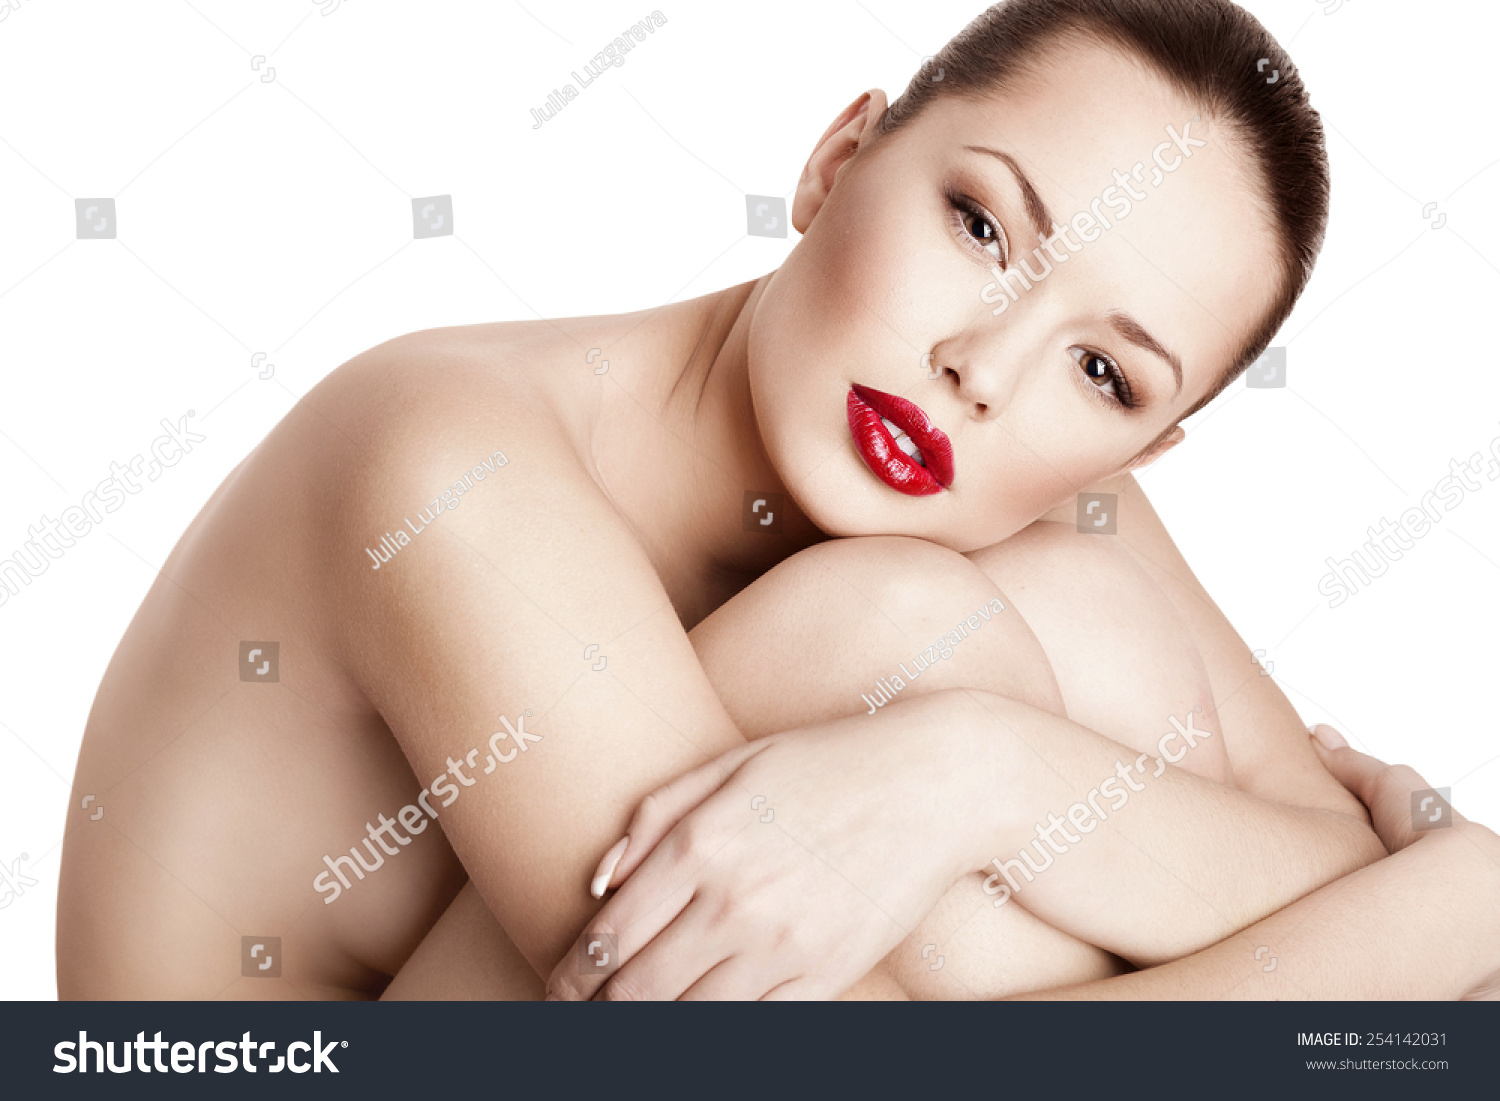 Woman Without Clothes Beautiful Skin Beautiful Woman With No Clothes